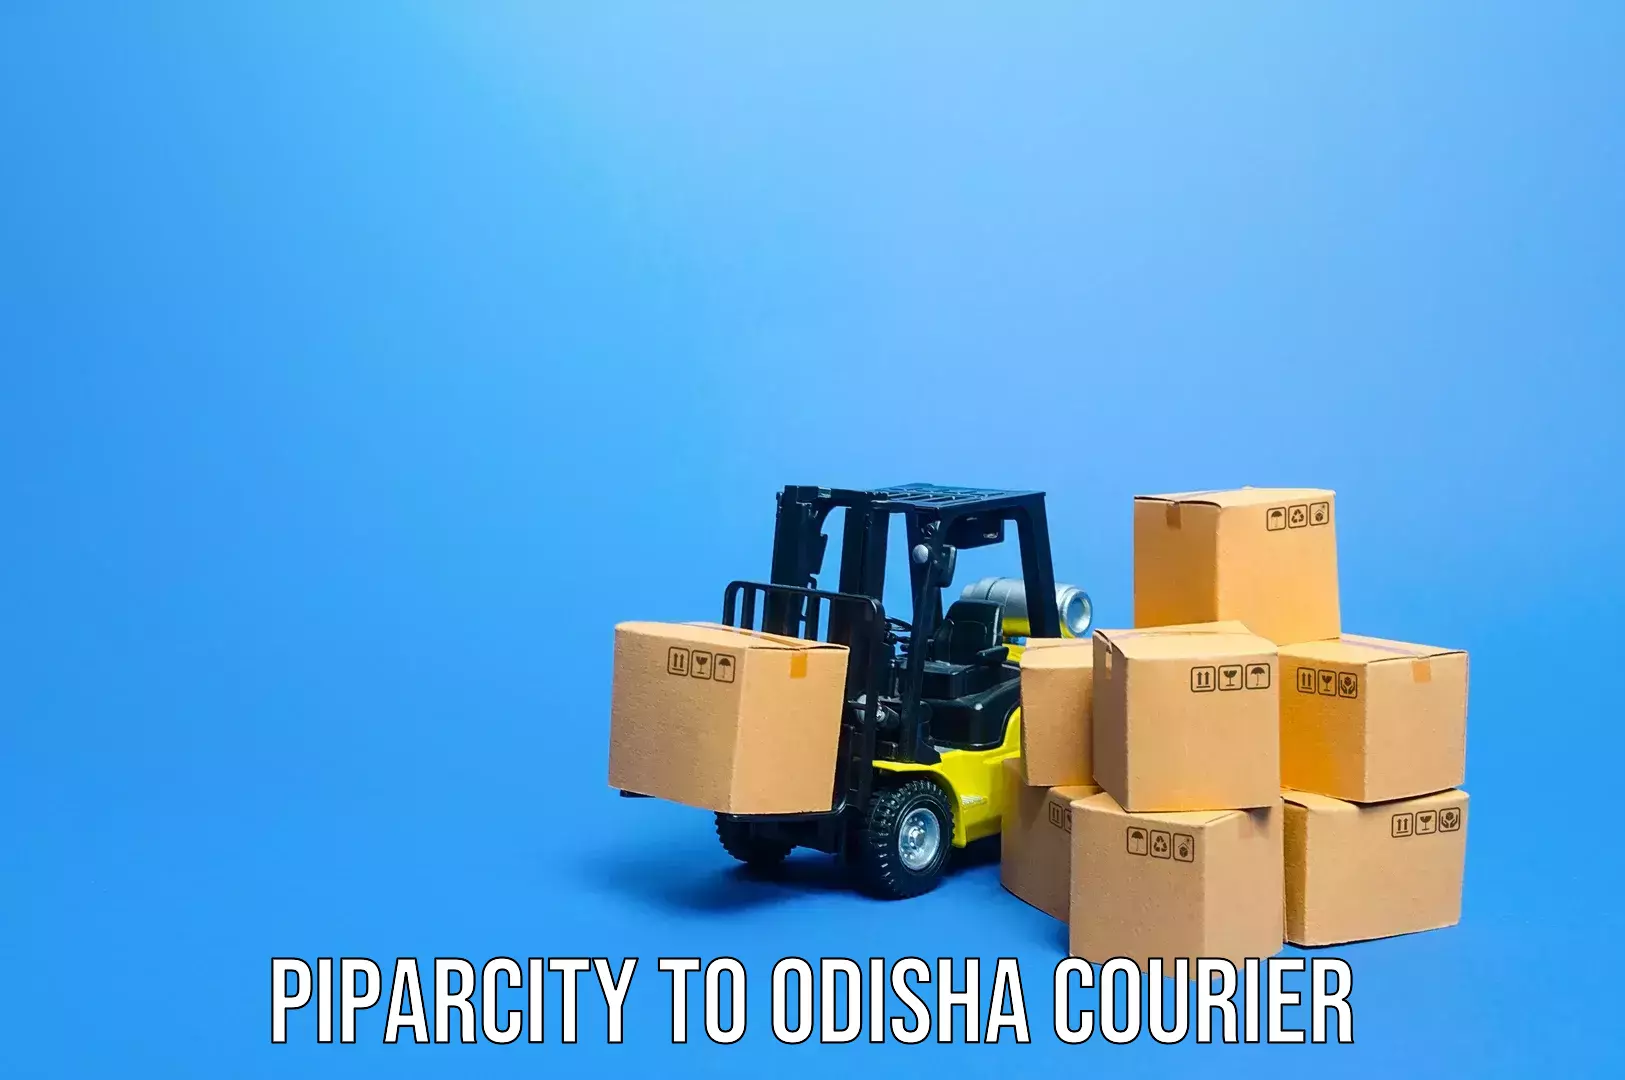 Express luggage delivery in Piparcity to Balasore